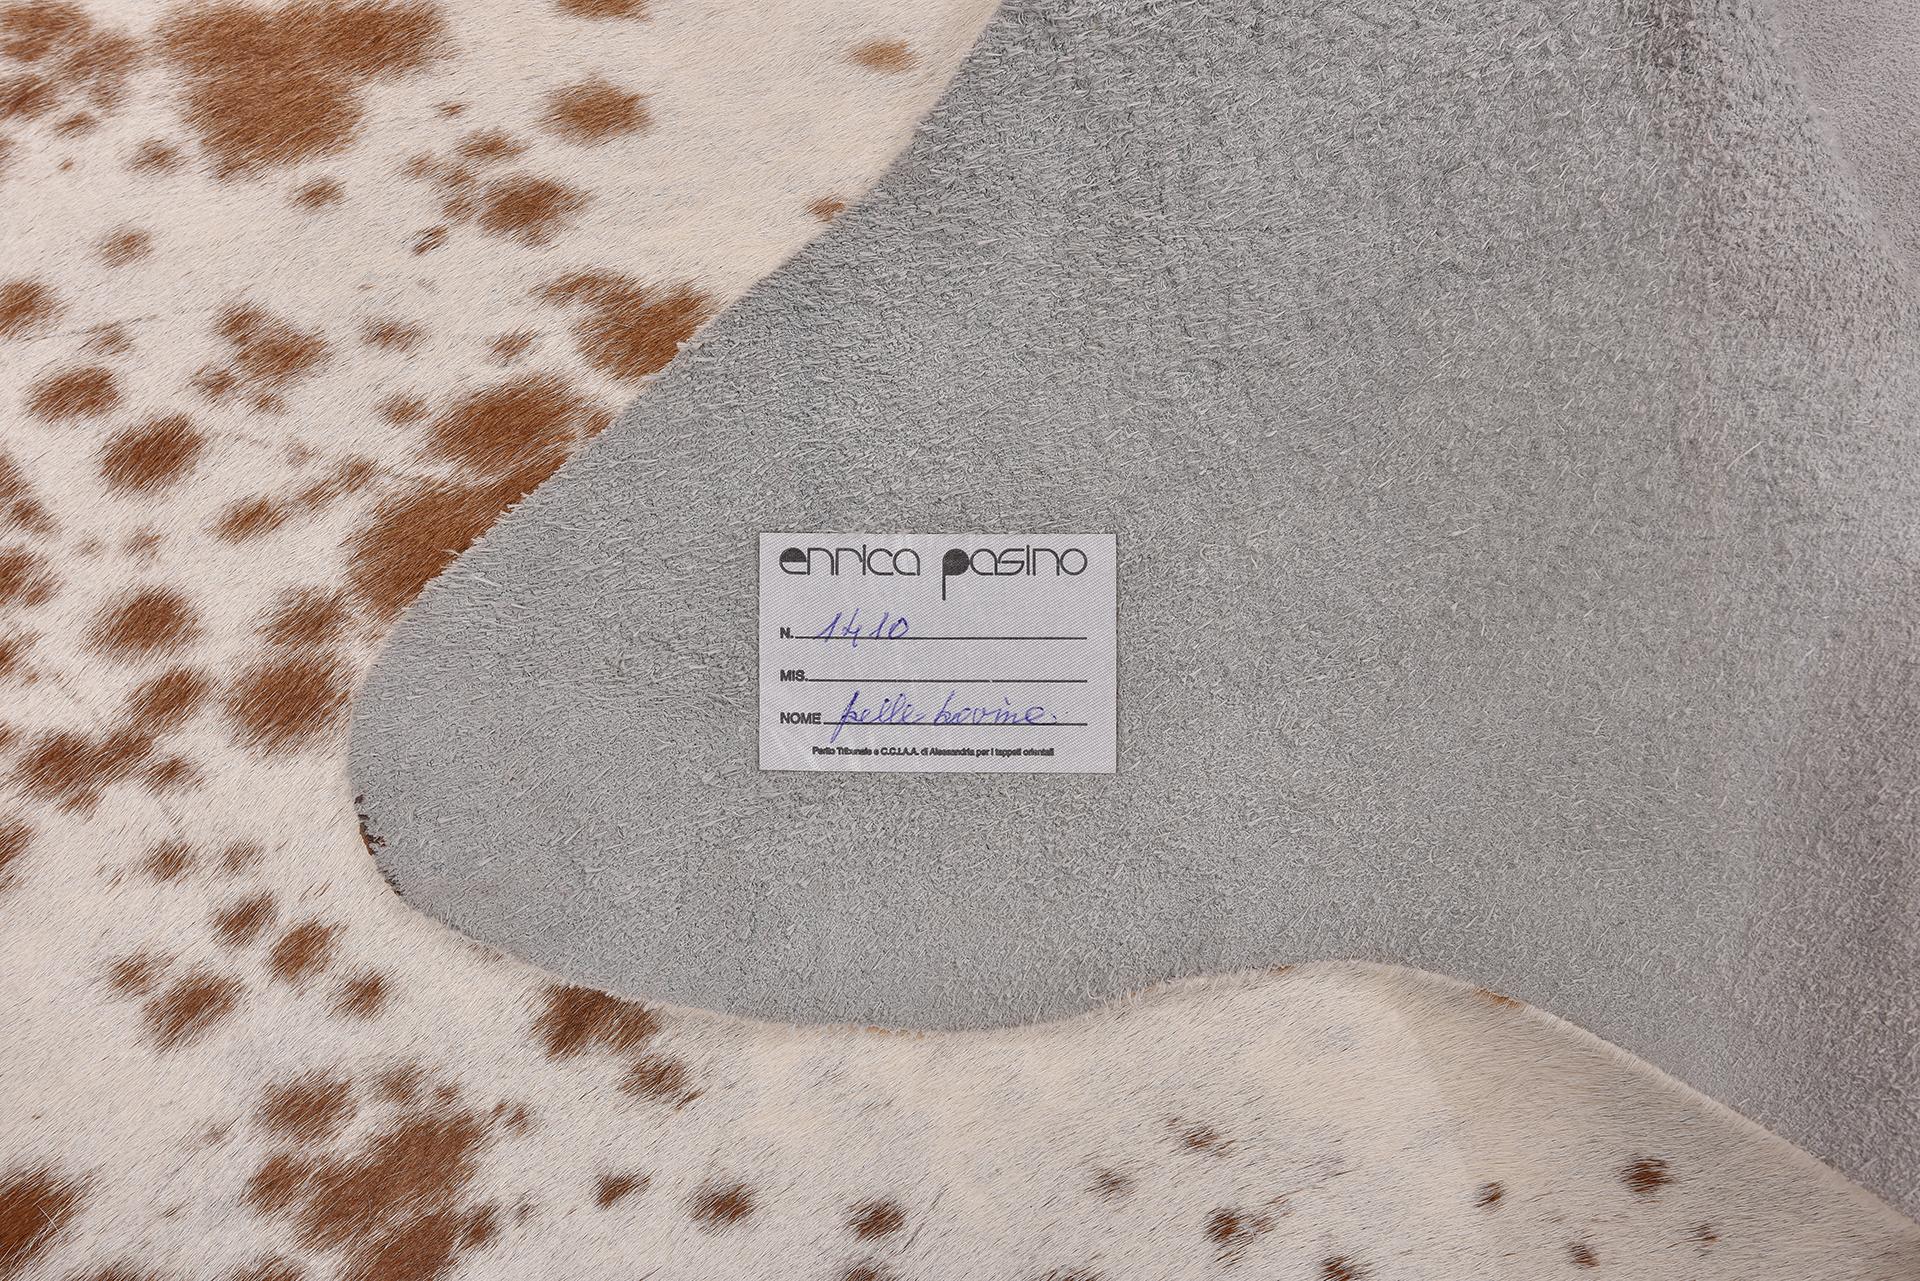 nr. 1410 - White leather in natural colors and special processing , so the edges have no waviness and adhere perfectly to the floor.
Now with an interesting price because I'm closing my activities.